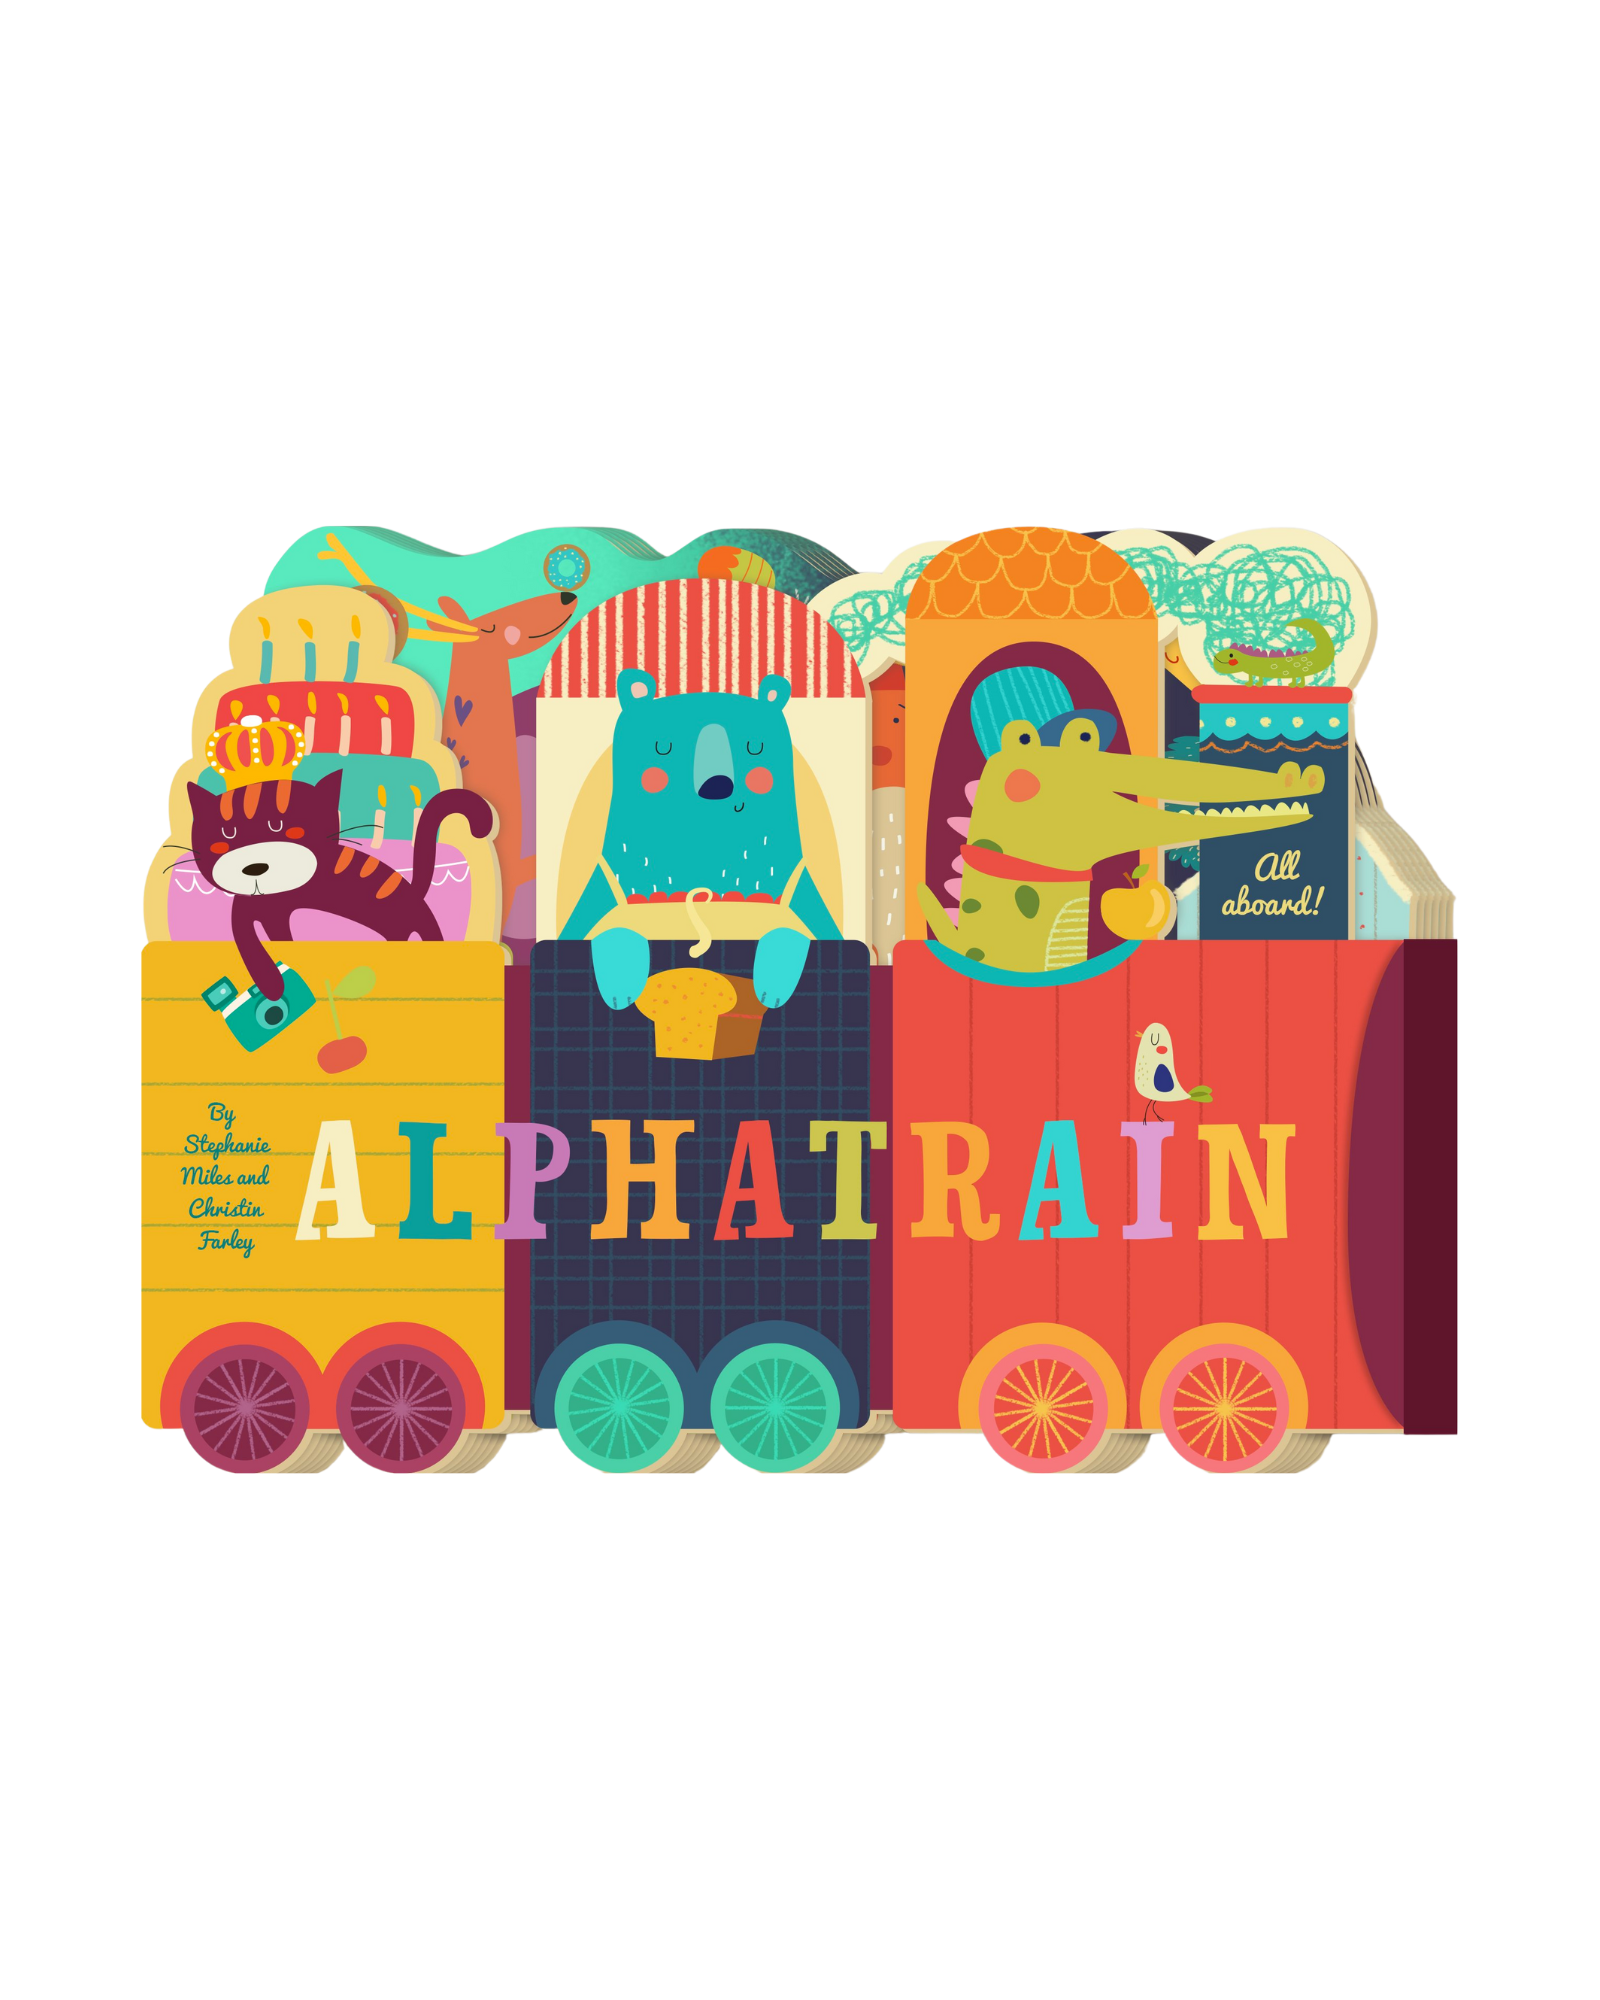 Front cover of Alphatrain board book, with a cat, bear, and alligator peeking out top of train cars